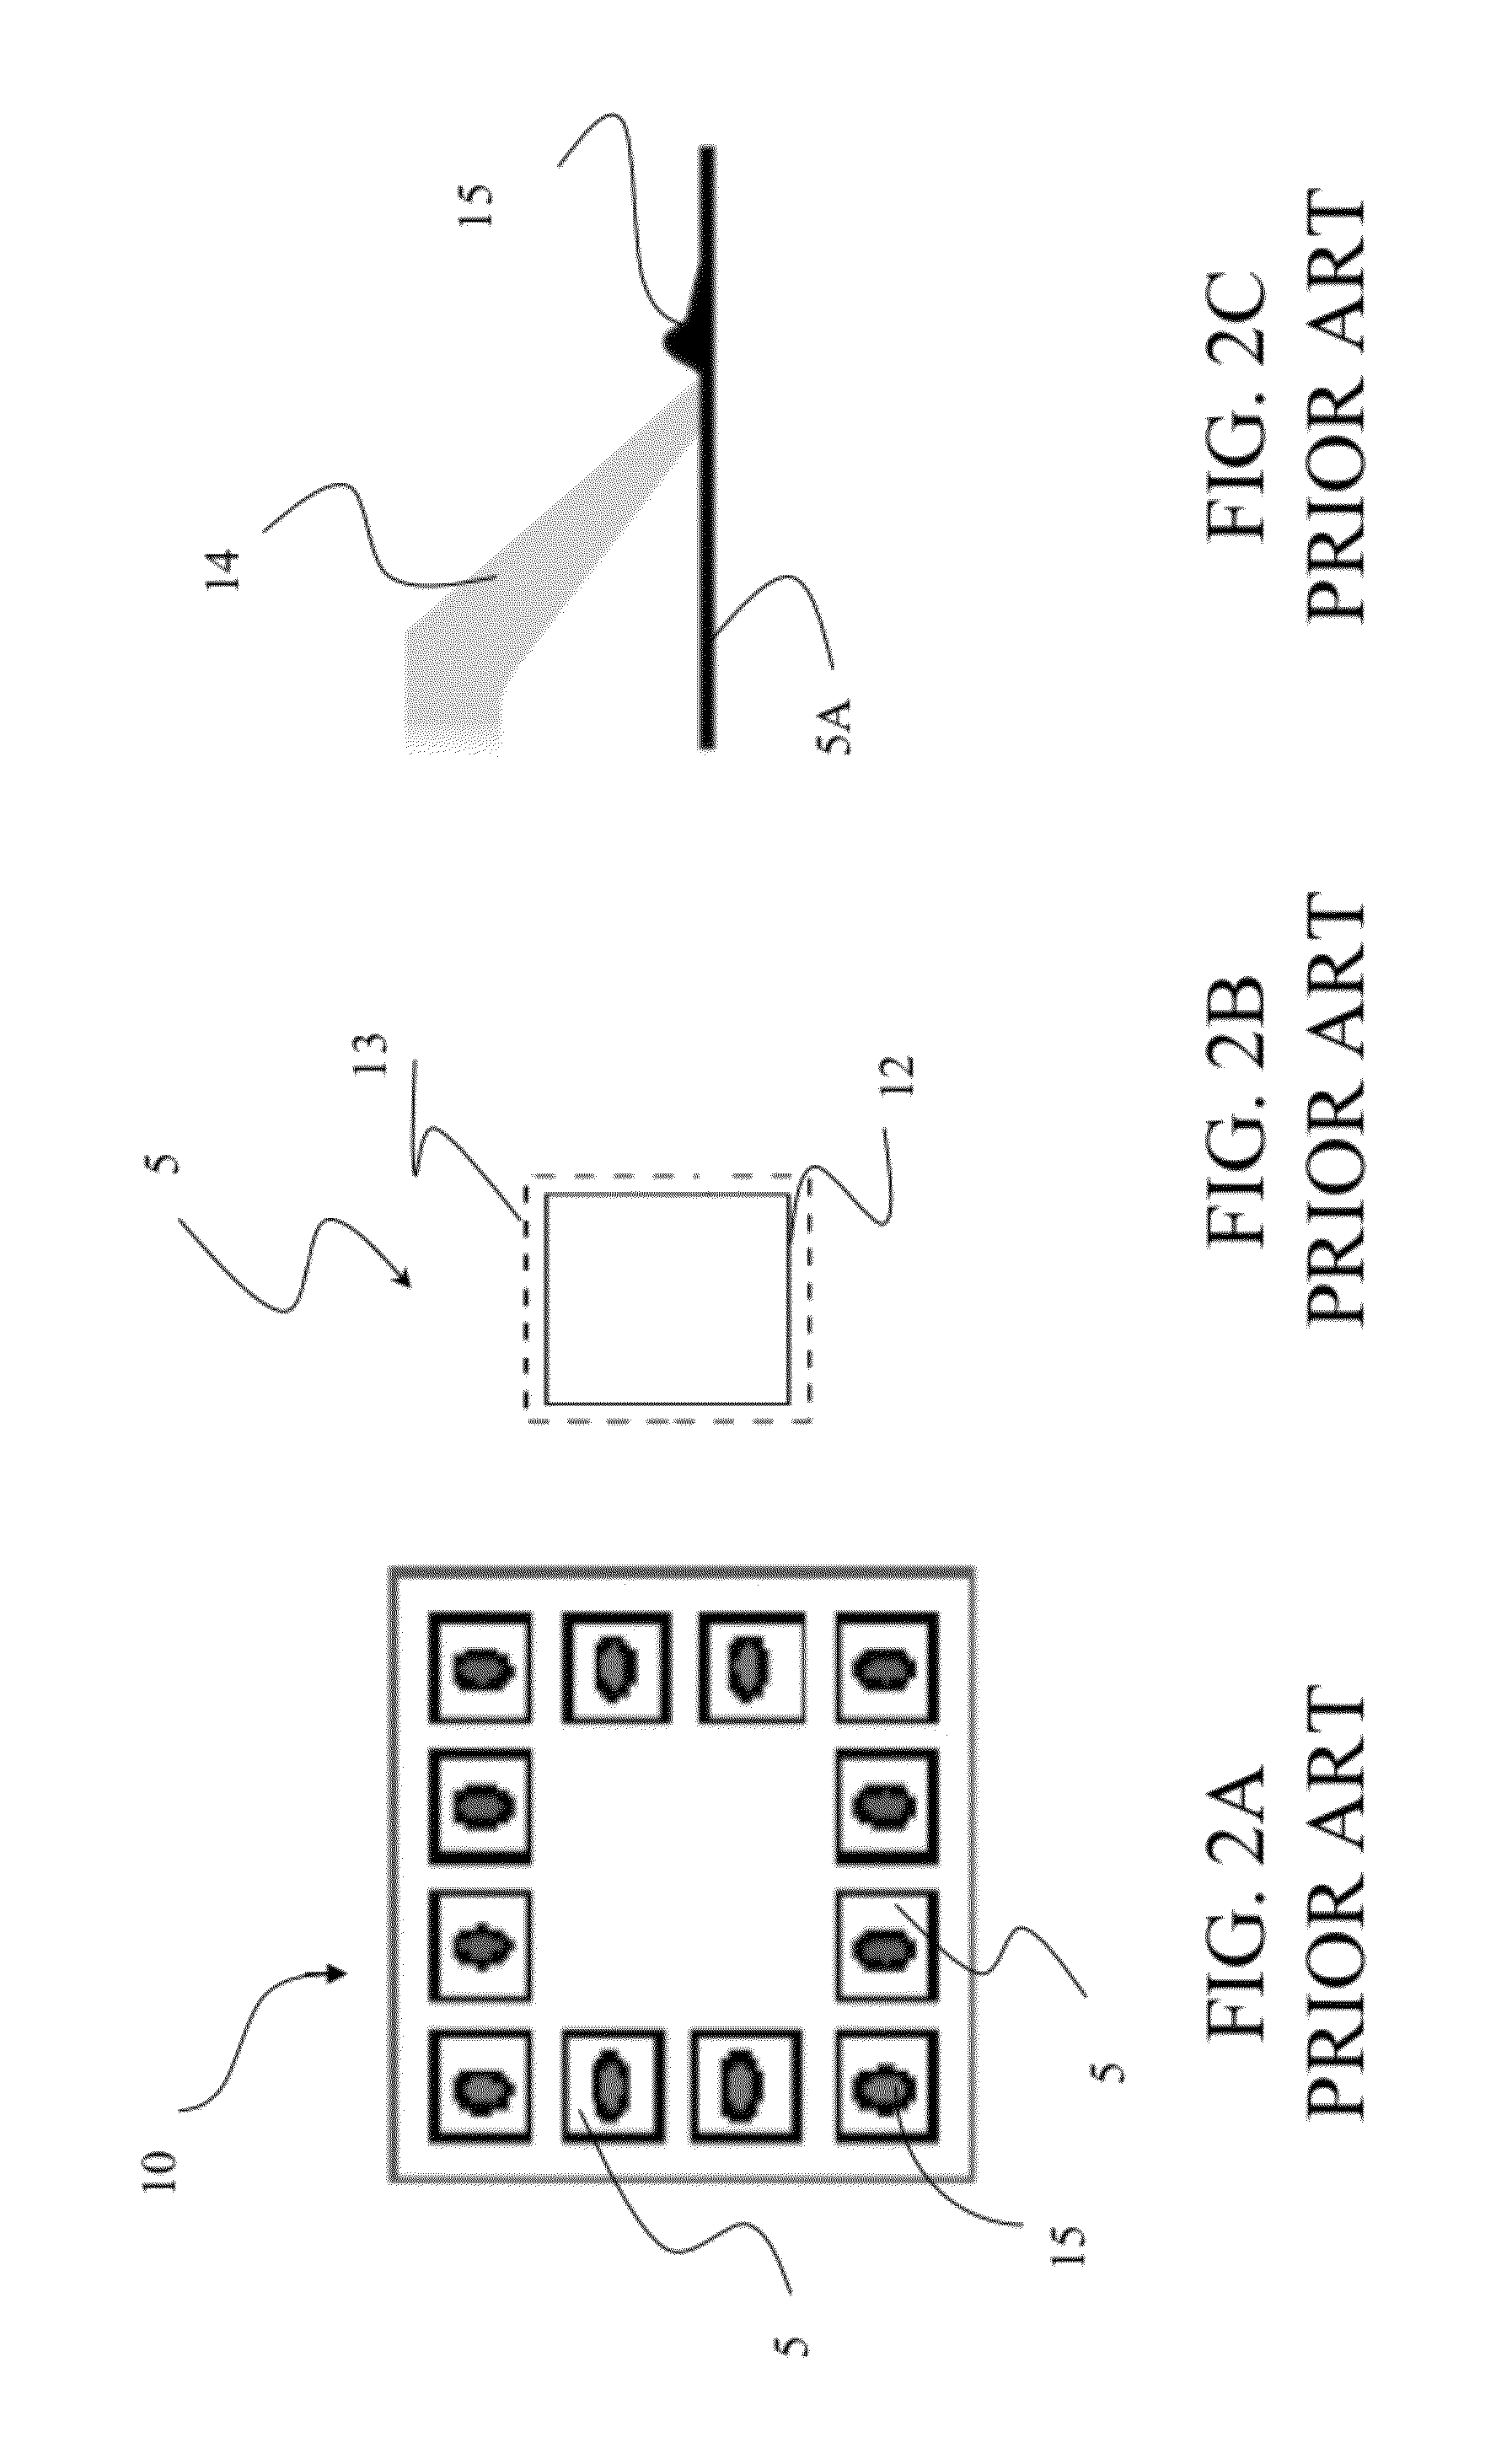 Electronic devices with extended metallization layer on a passivation layer